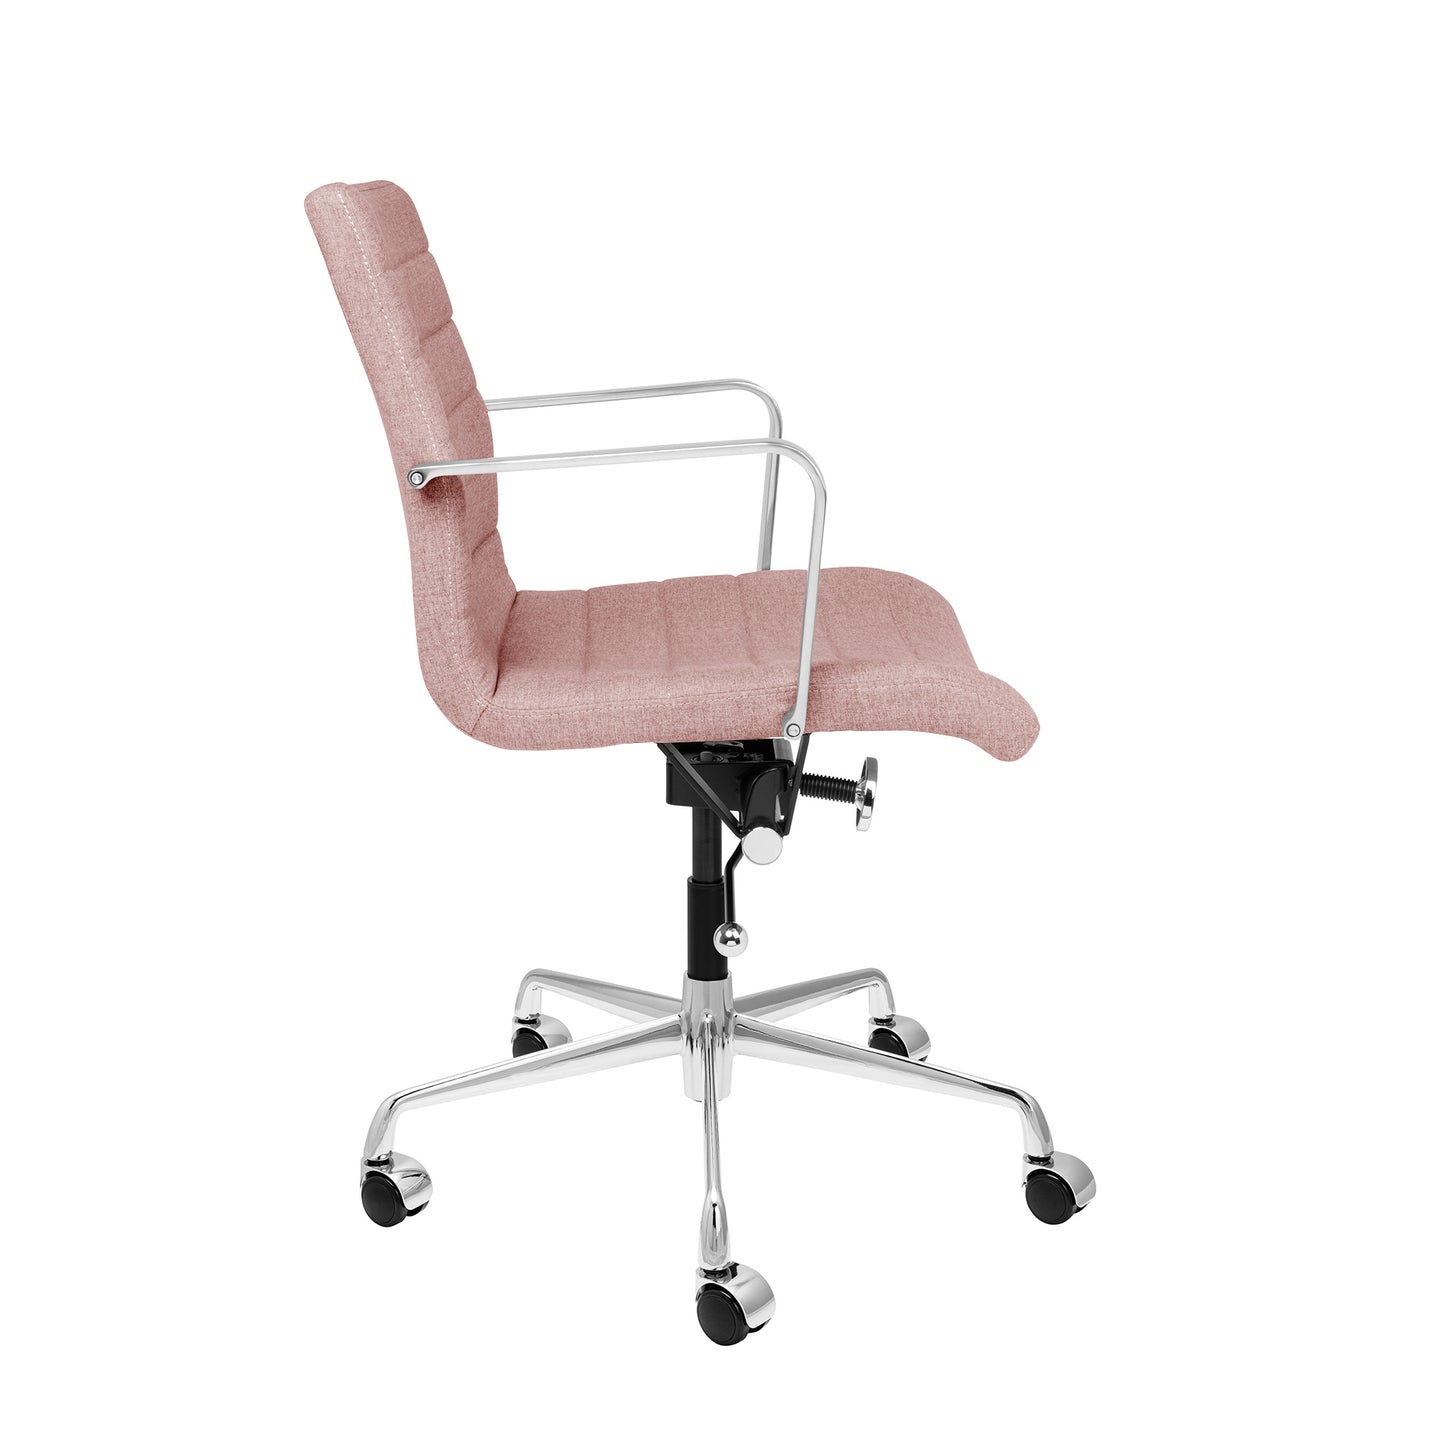 SOHO II Ribbed Management Chair (Coral Pink Fabric)